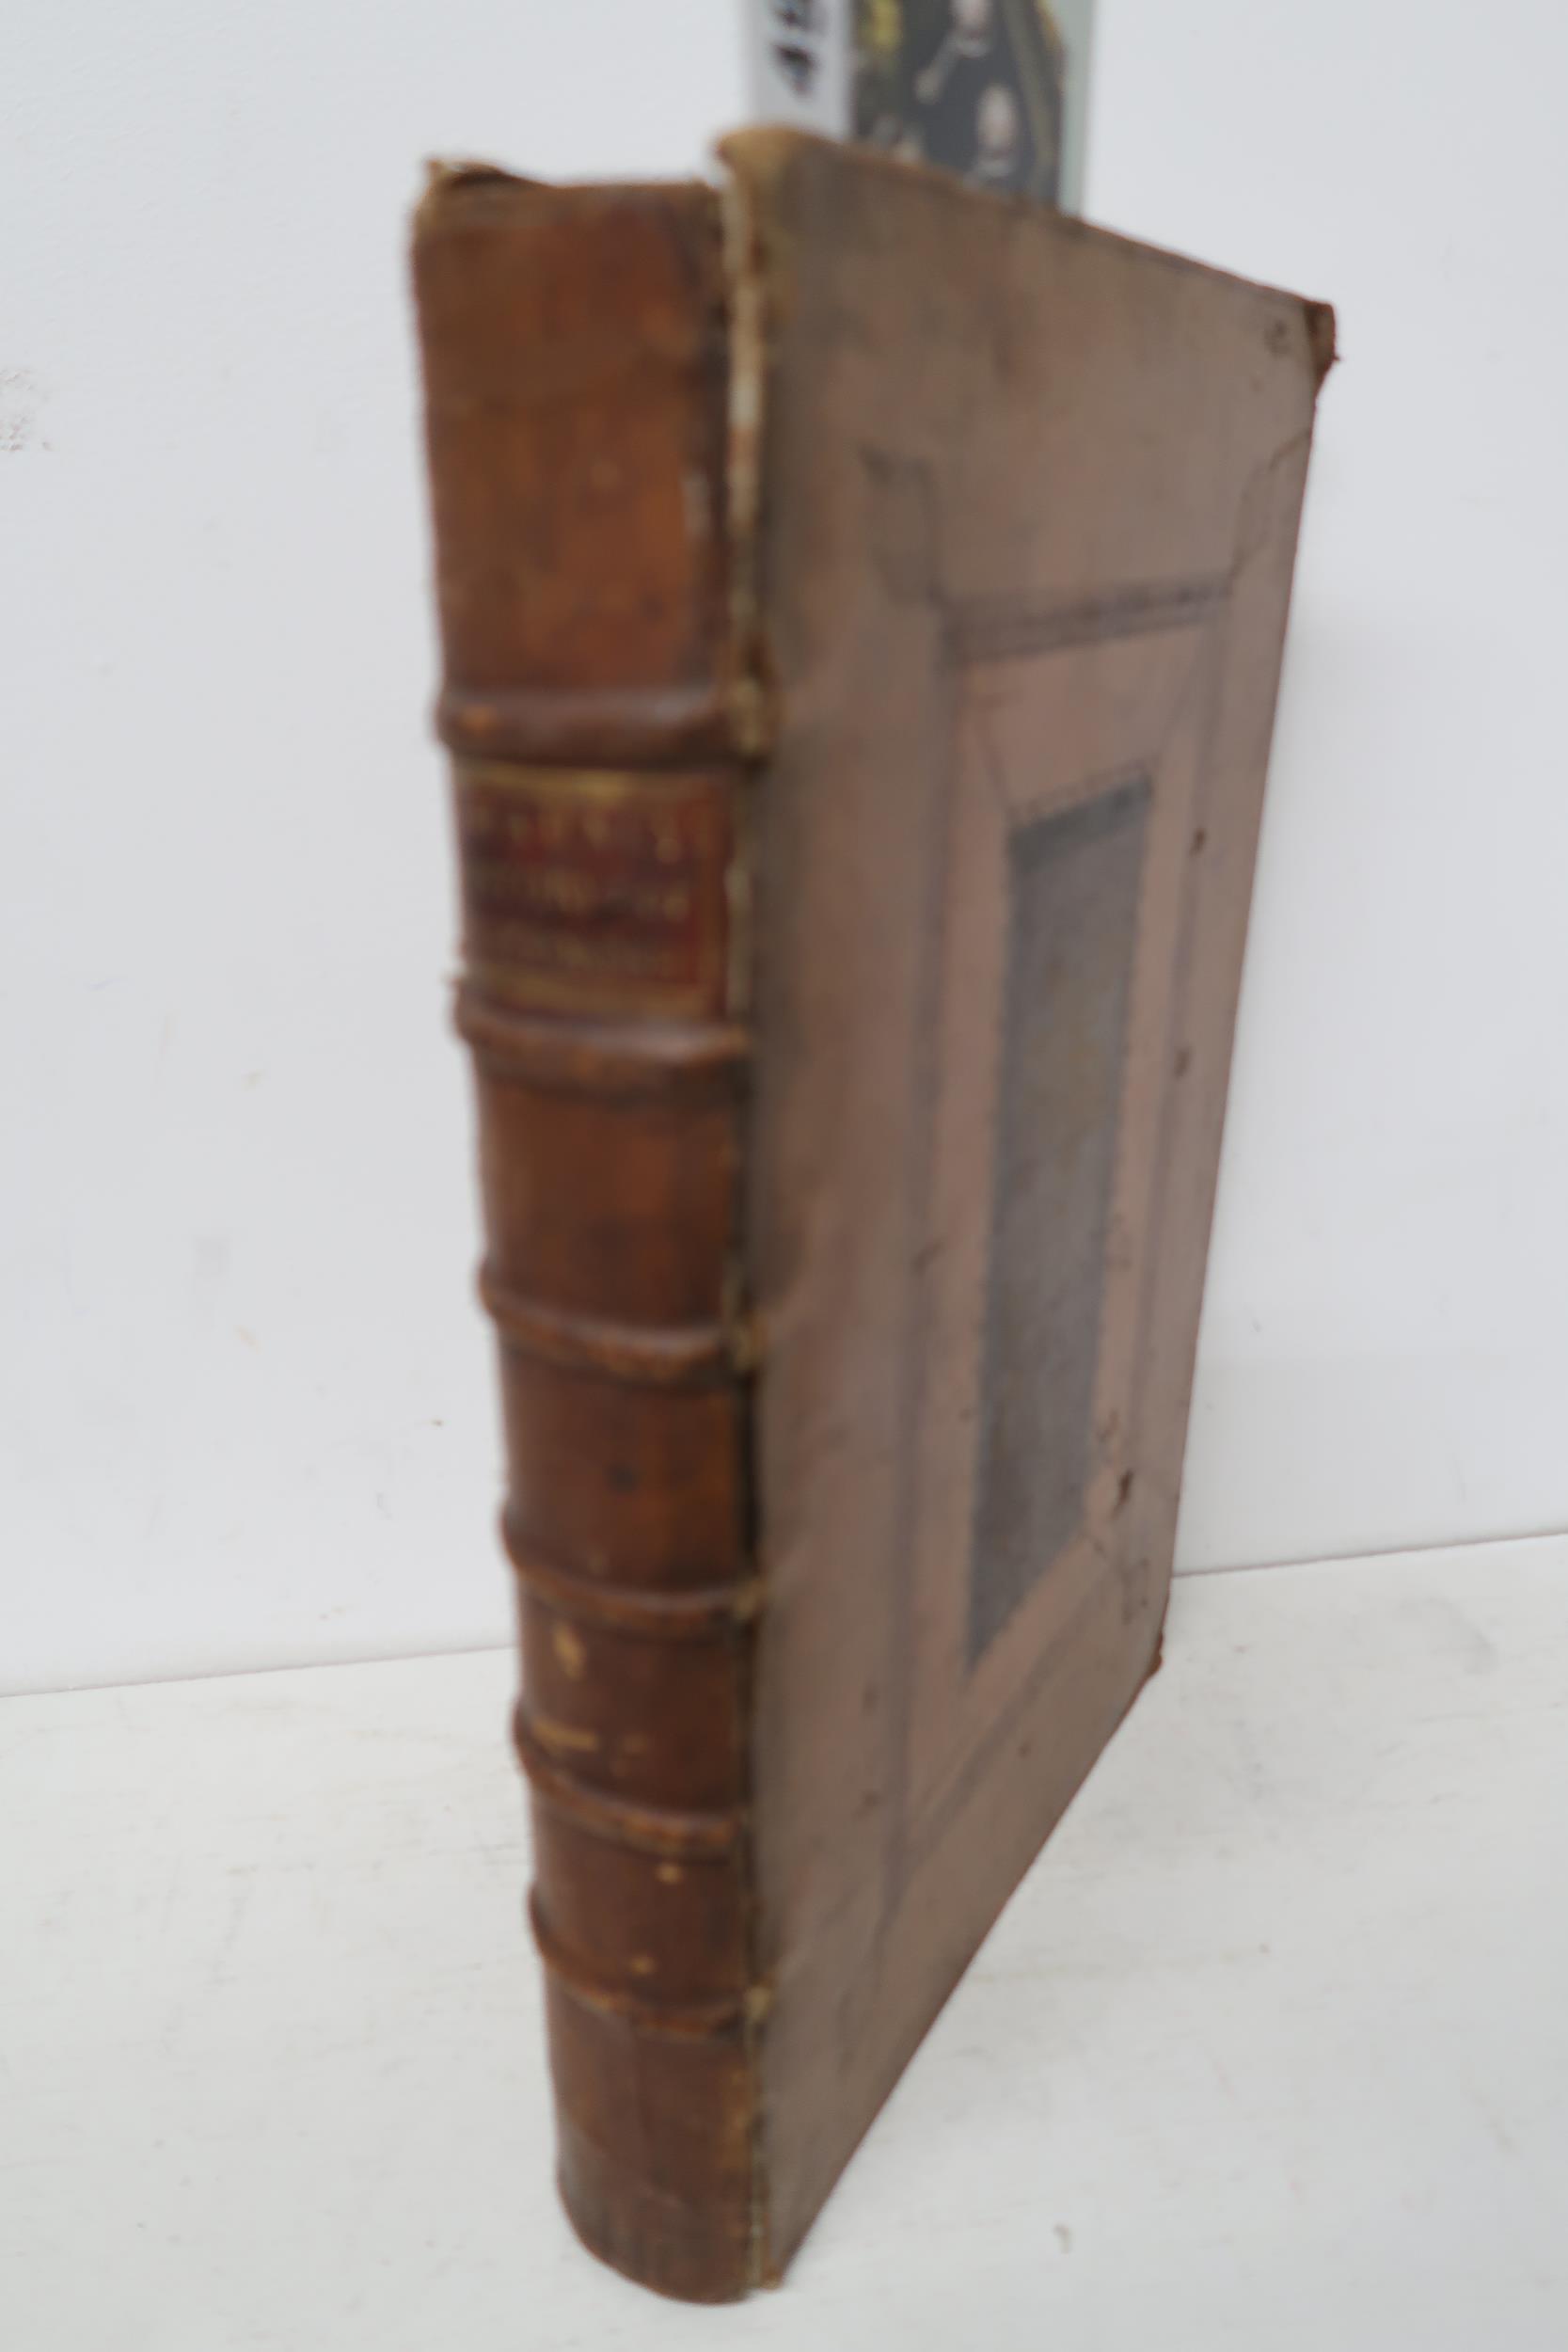 A leather bound book - Chauncy History of Hertfordshire - Image 2 of 4